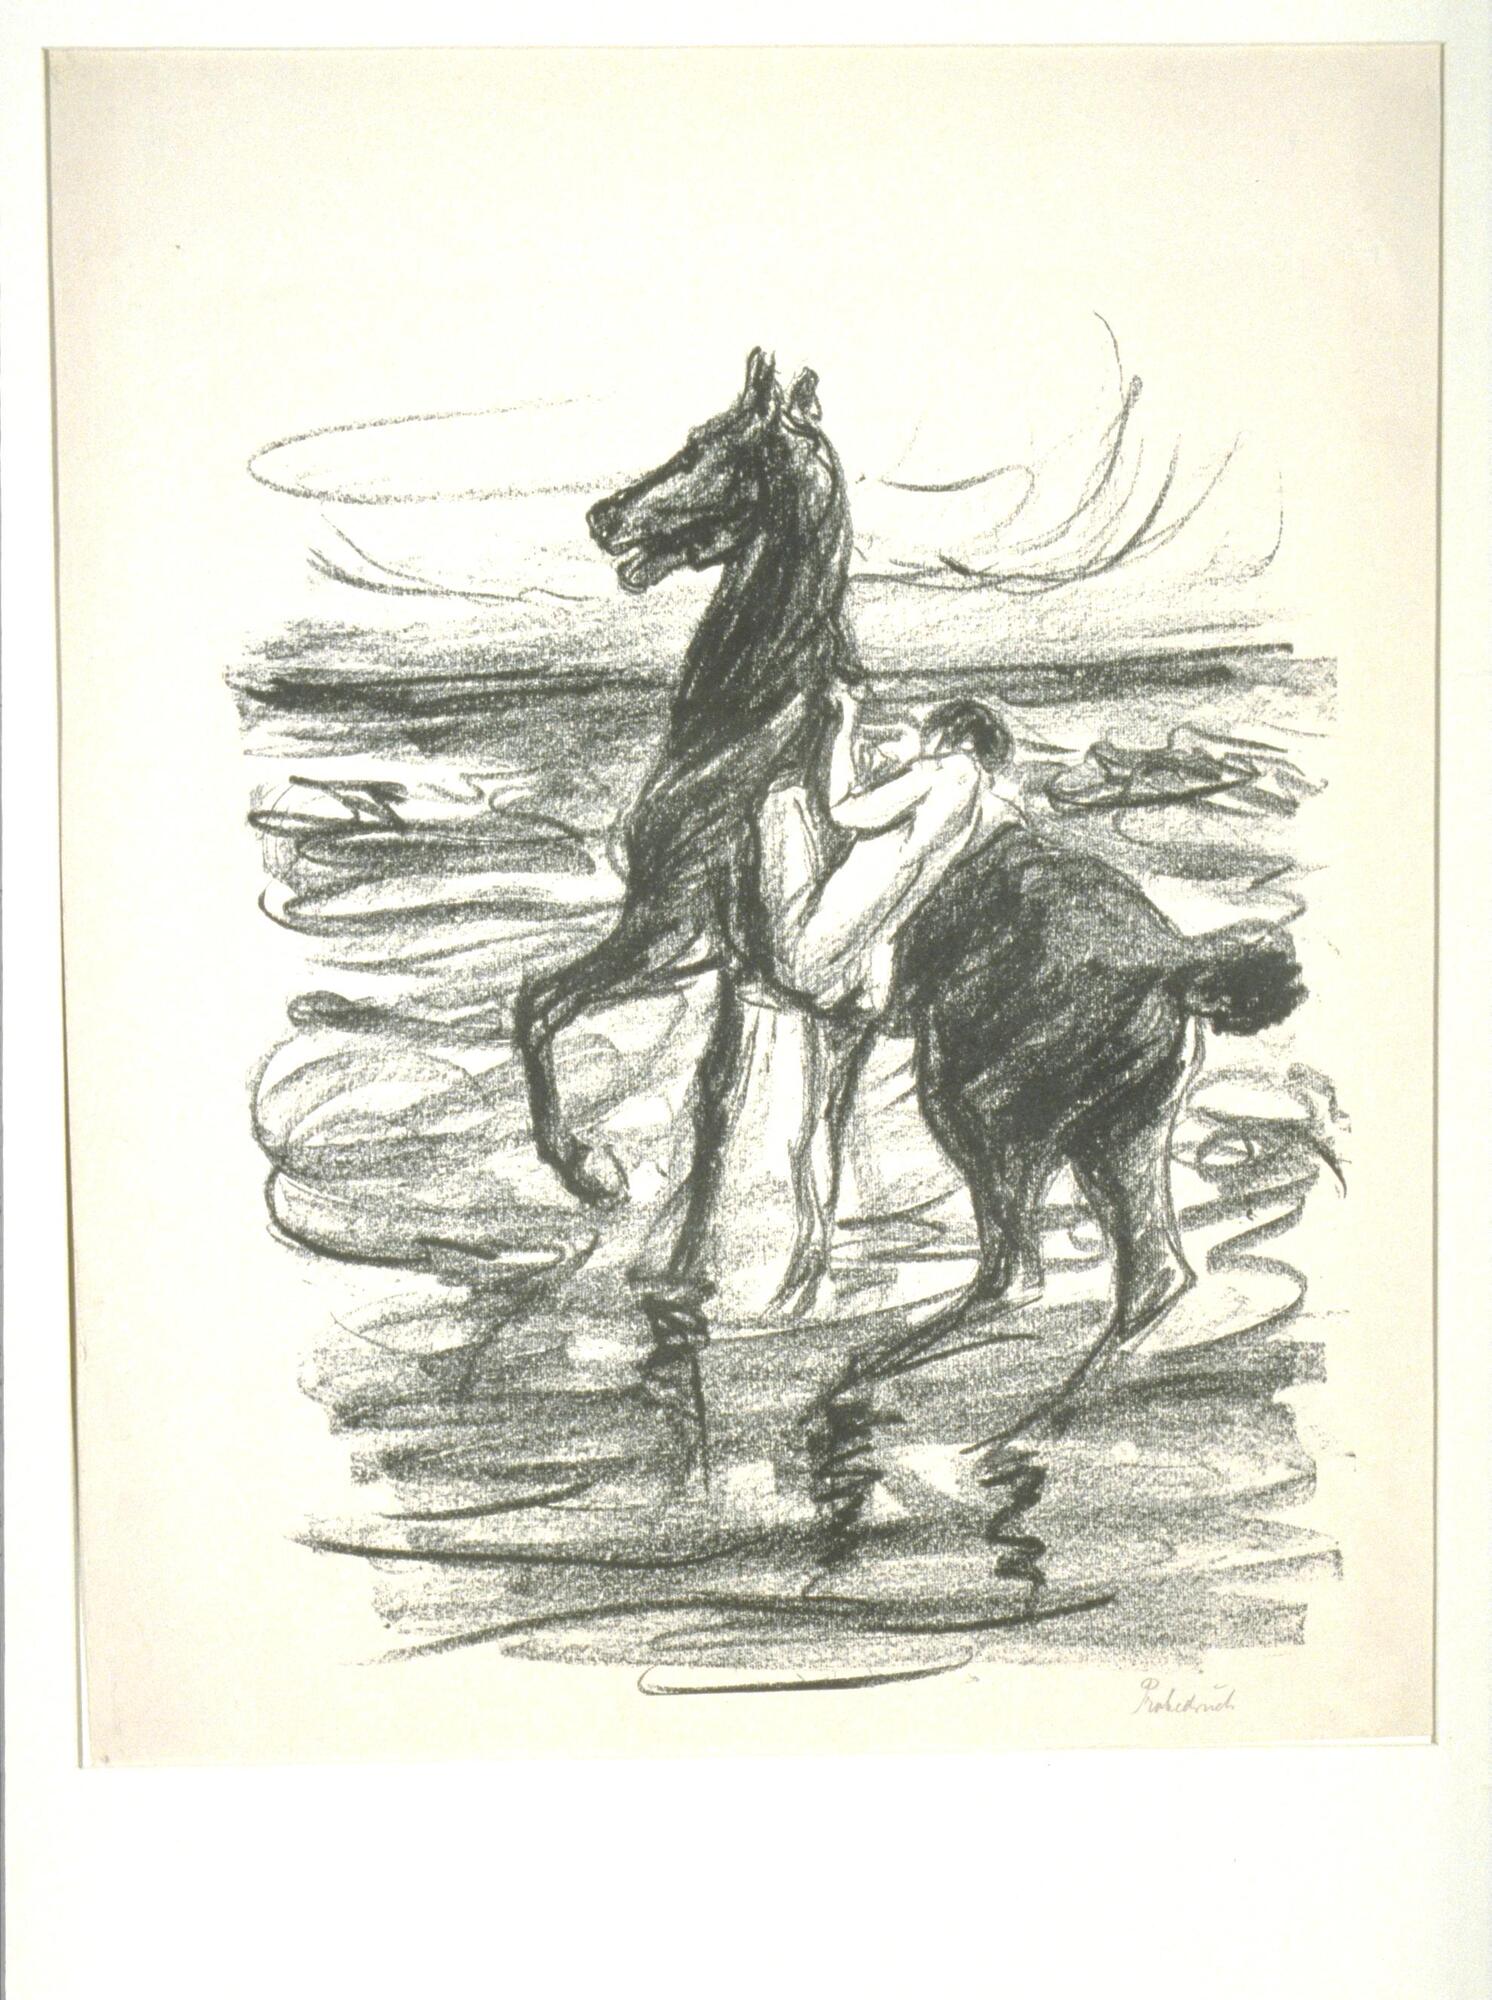 At the center of the lithograph, there is a nude man trying to get on a horse. The man's bent leg appears to be placed firmly against the horse's side and his body is pushed against its back. In the background, there is a strong set of horizion lines and the forground scene is enveloped in think and sketchy lines.